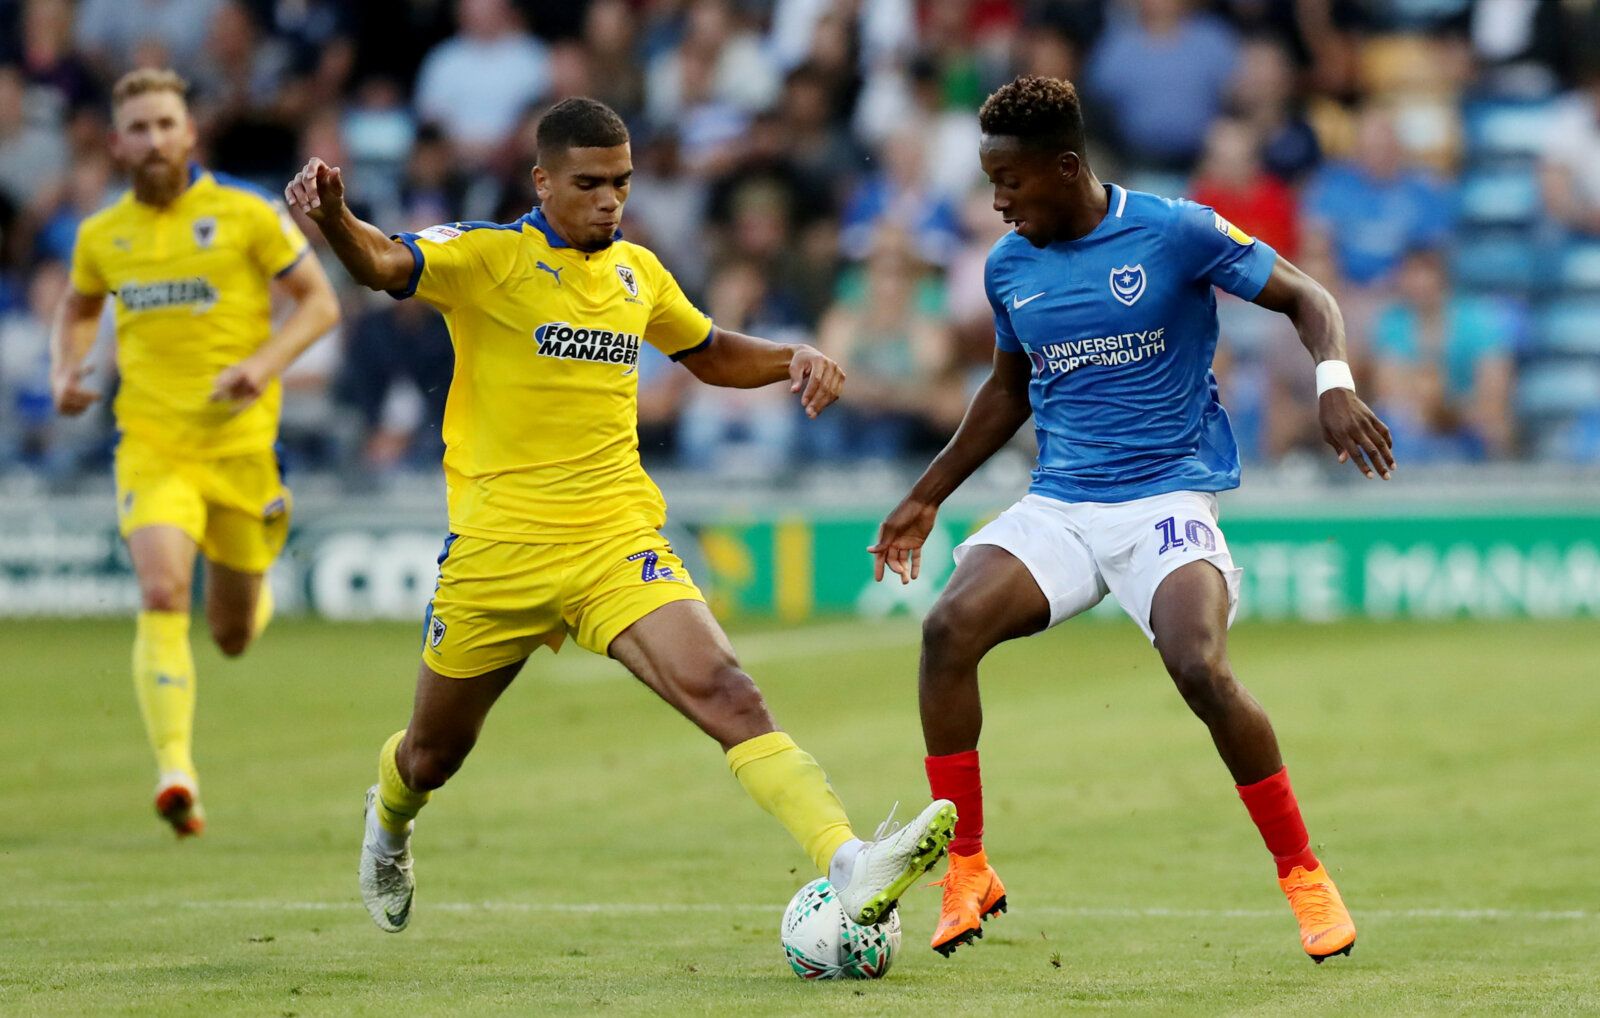 Soccer Football - Carabao Cup First Round - Portsmouth v AFC Wimbledon - Fratton Park, Portsmouth, Britain - August 14, 2018   Portsmouth's Jamal Lowe in action with AFC Wimbledon's Tennai Watson   Action Images/Peter Cziborra    EDITORIAL USE ONLY. No use with unauthorized audio, video, data, fixture lists, club/league logos or 